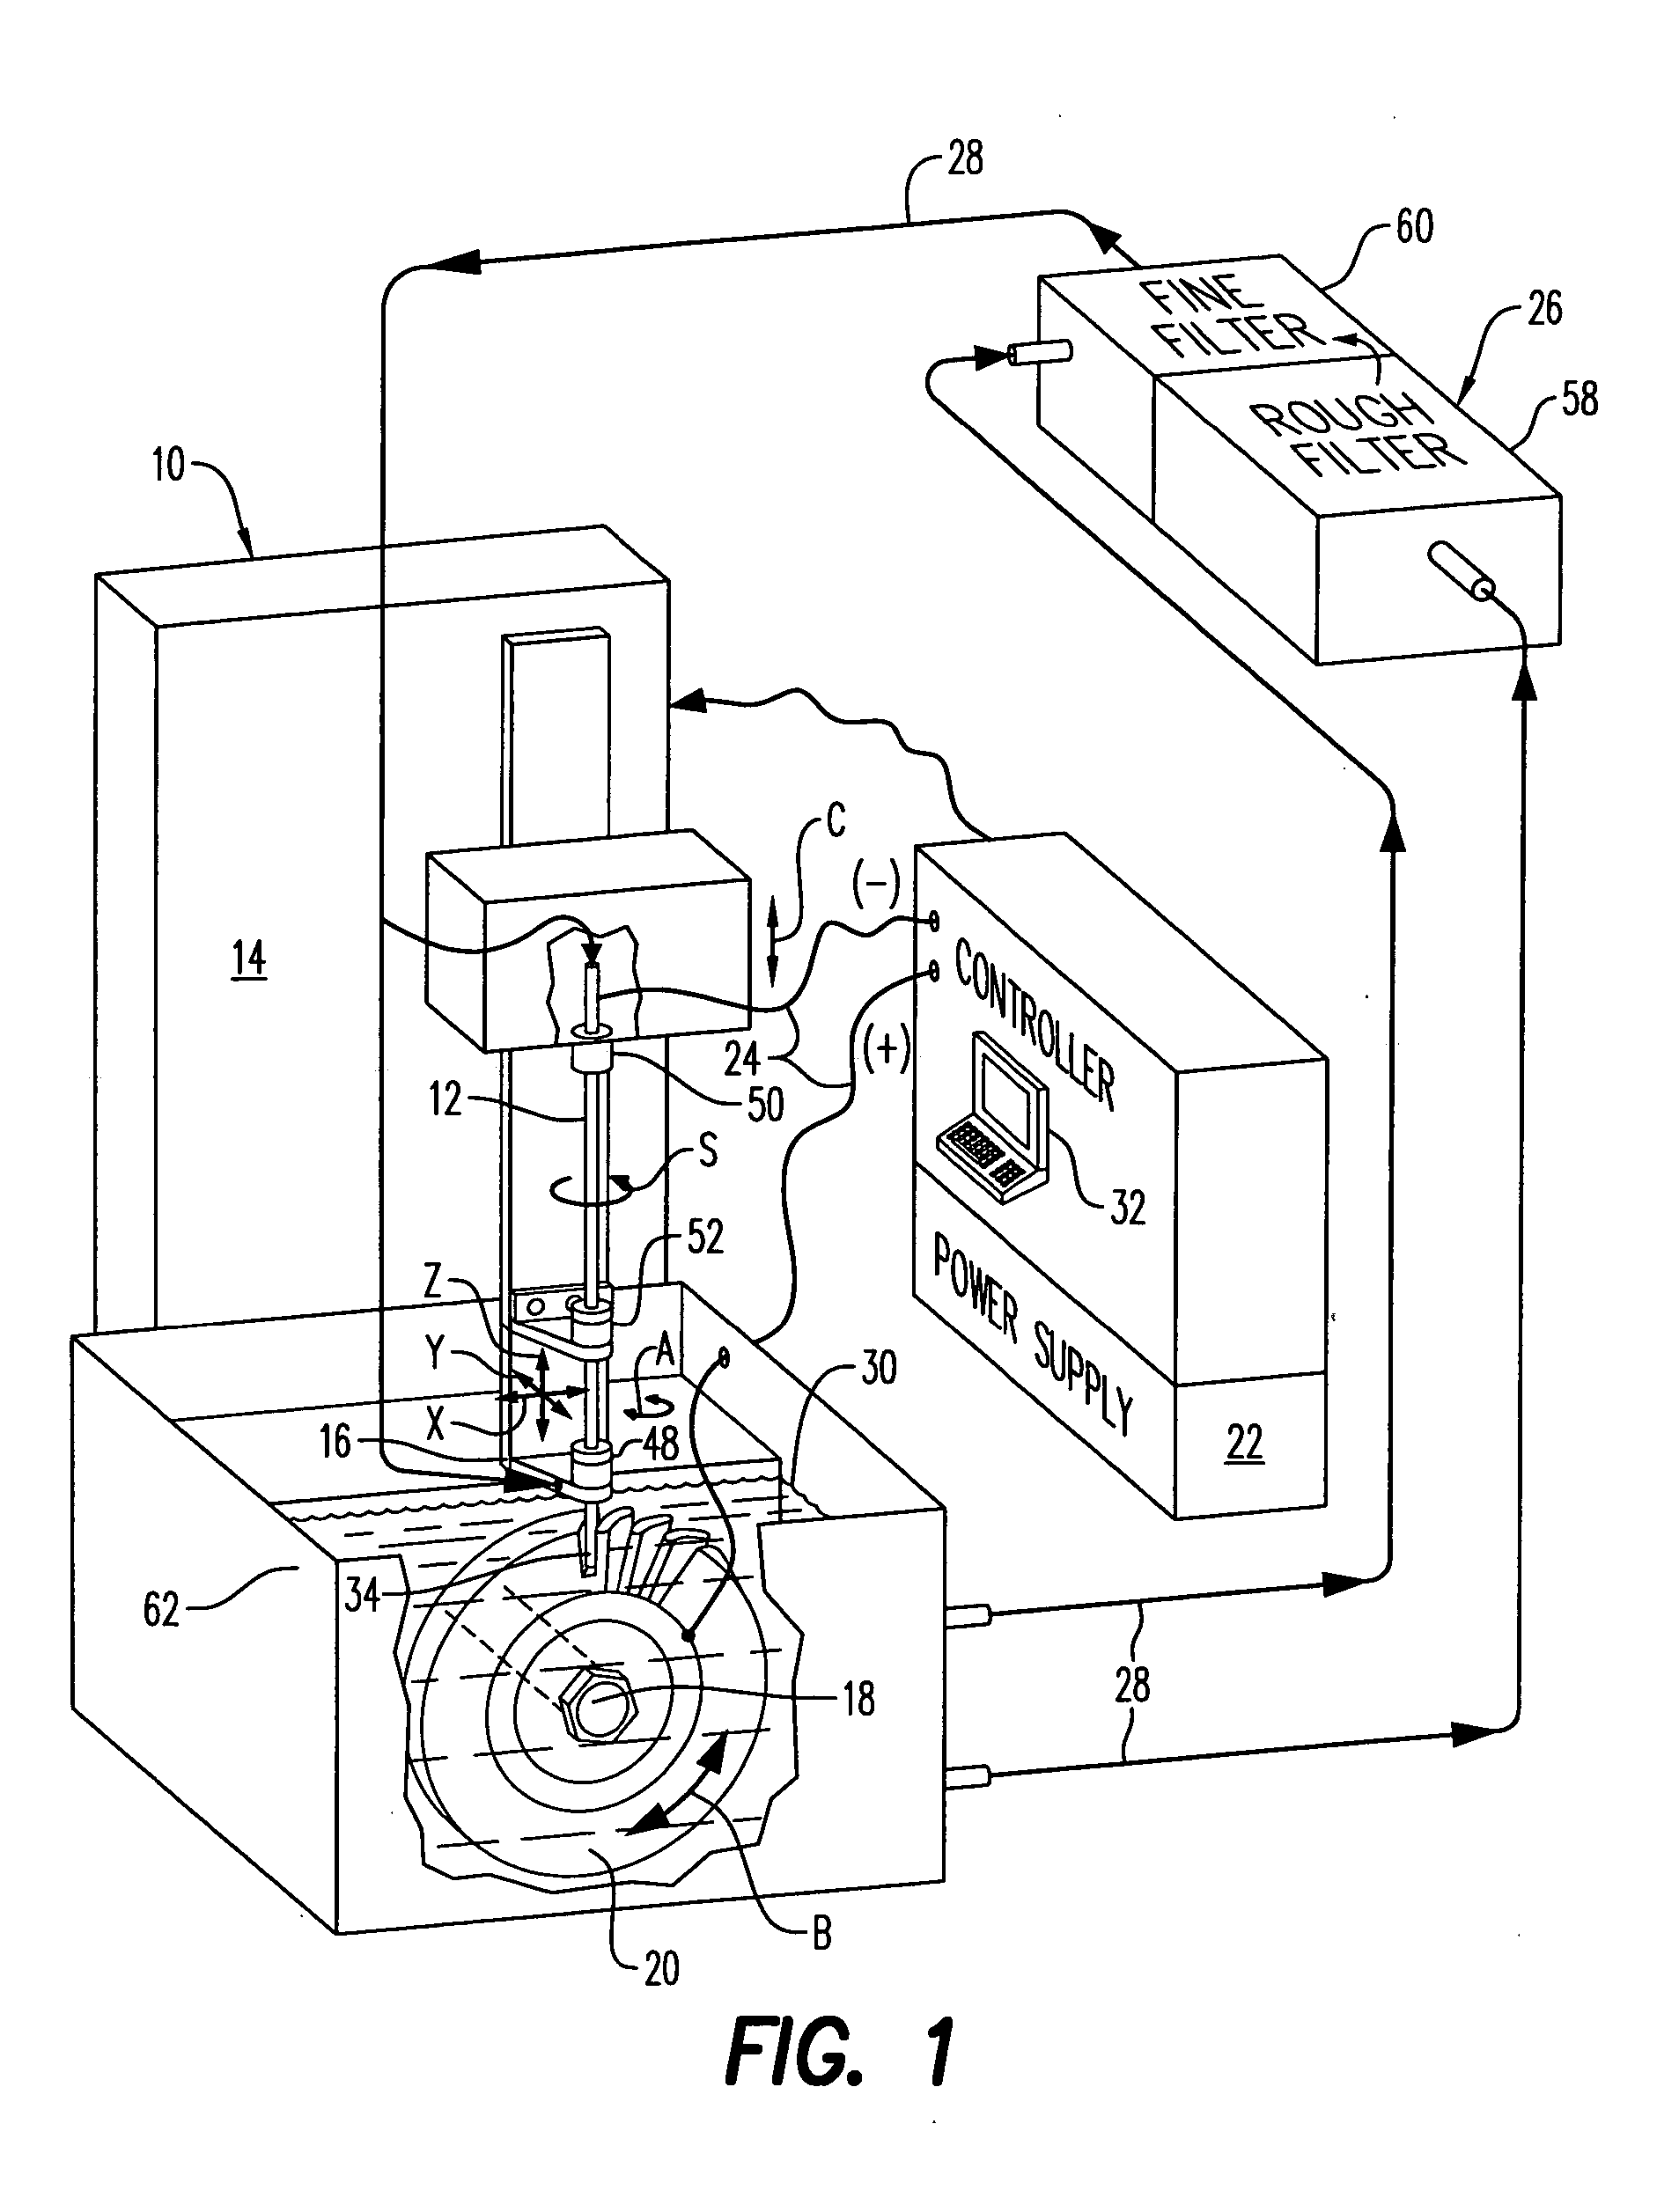 Distributed arc electroerosion